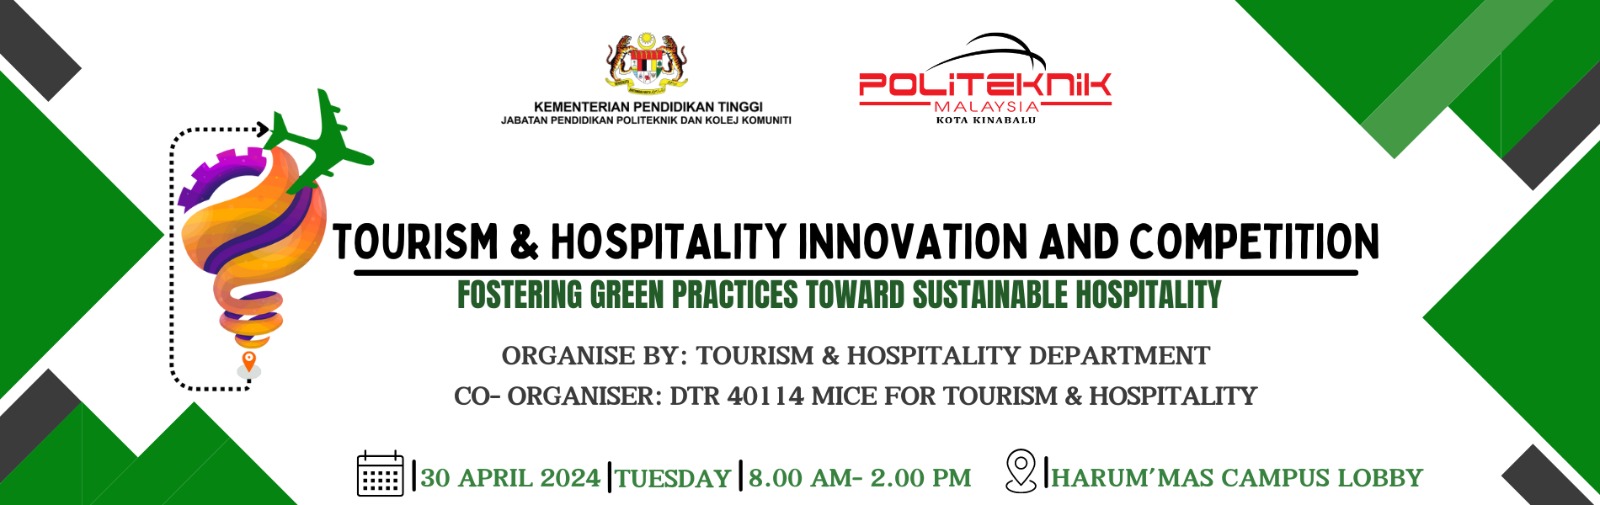 Tourism & Hospitality Innovation & Competition